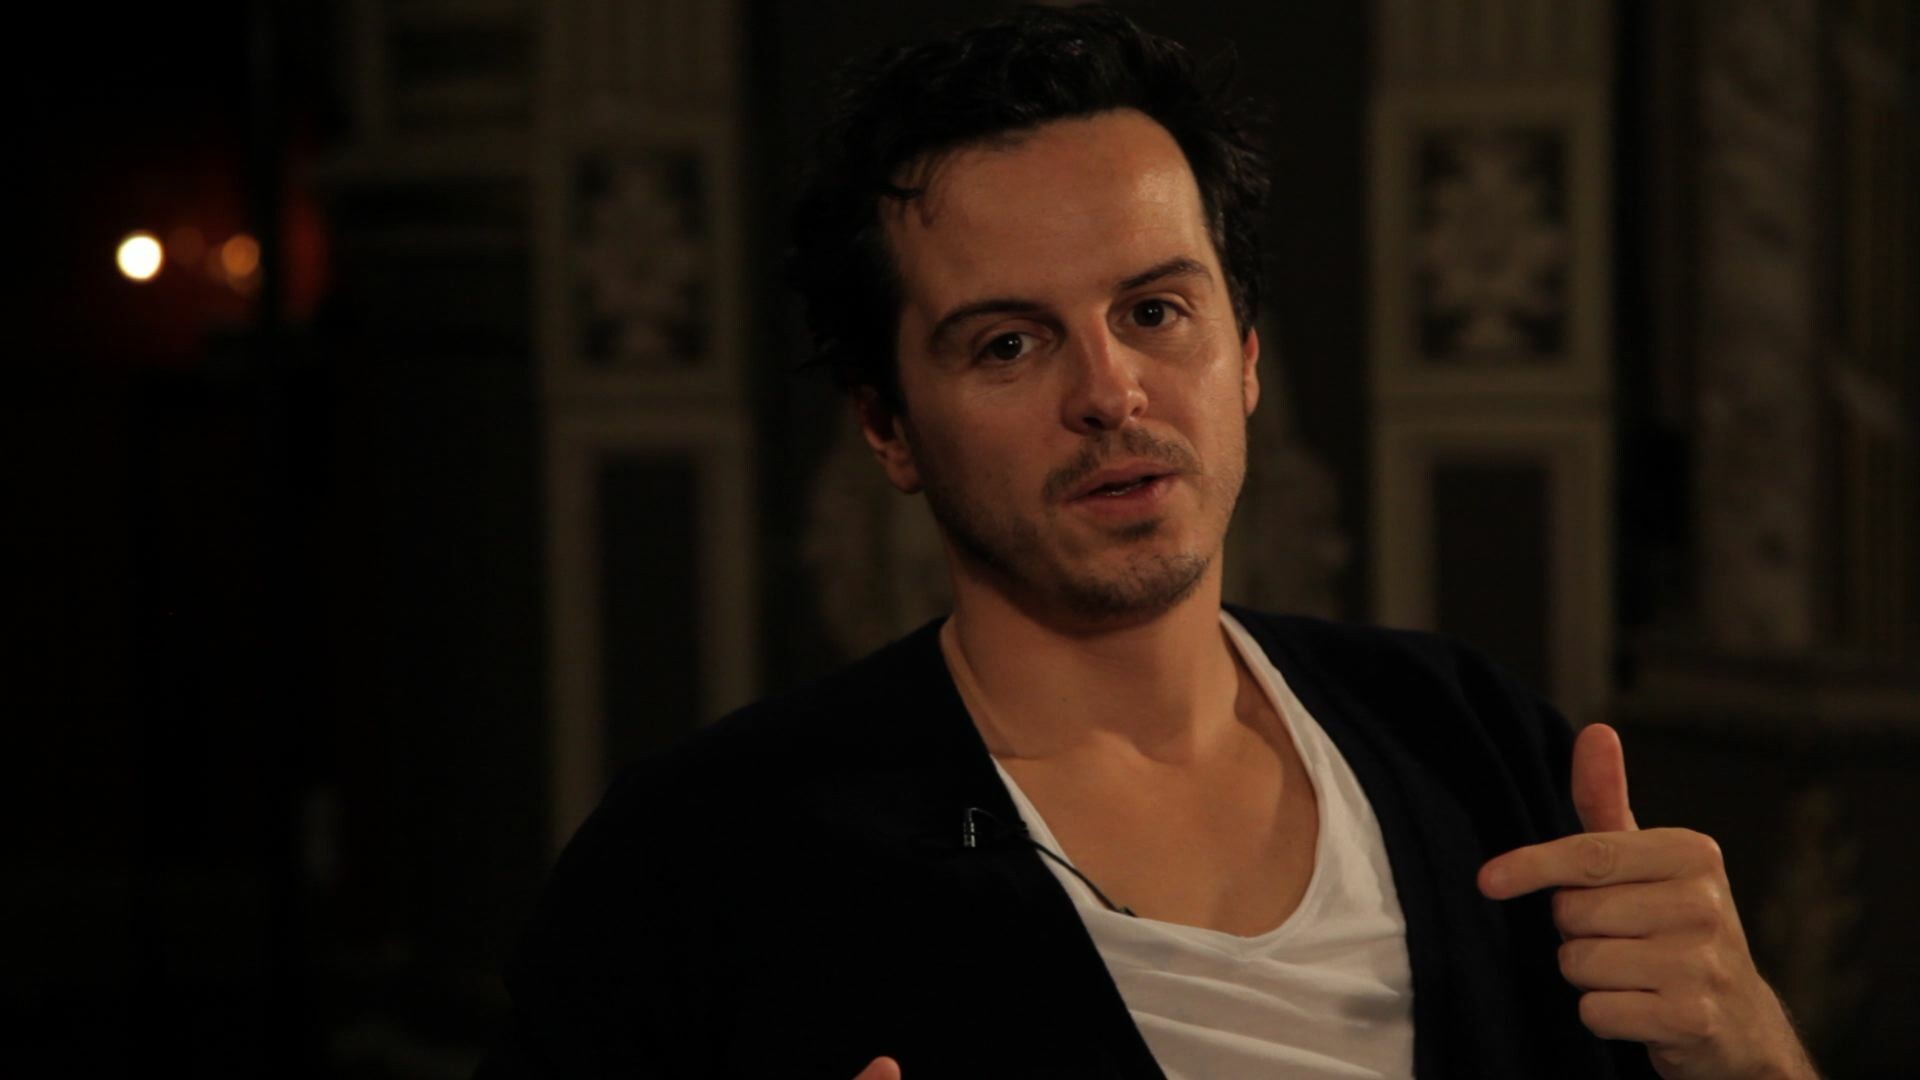 Fleabag (TV Series): Andrew Scott as the priest marrying Godmother and Dad. 1920x1080 Full HD Background.